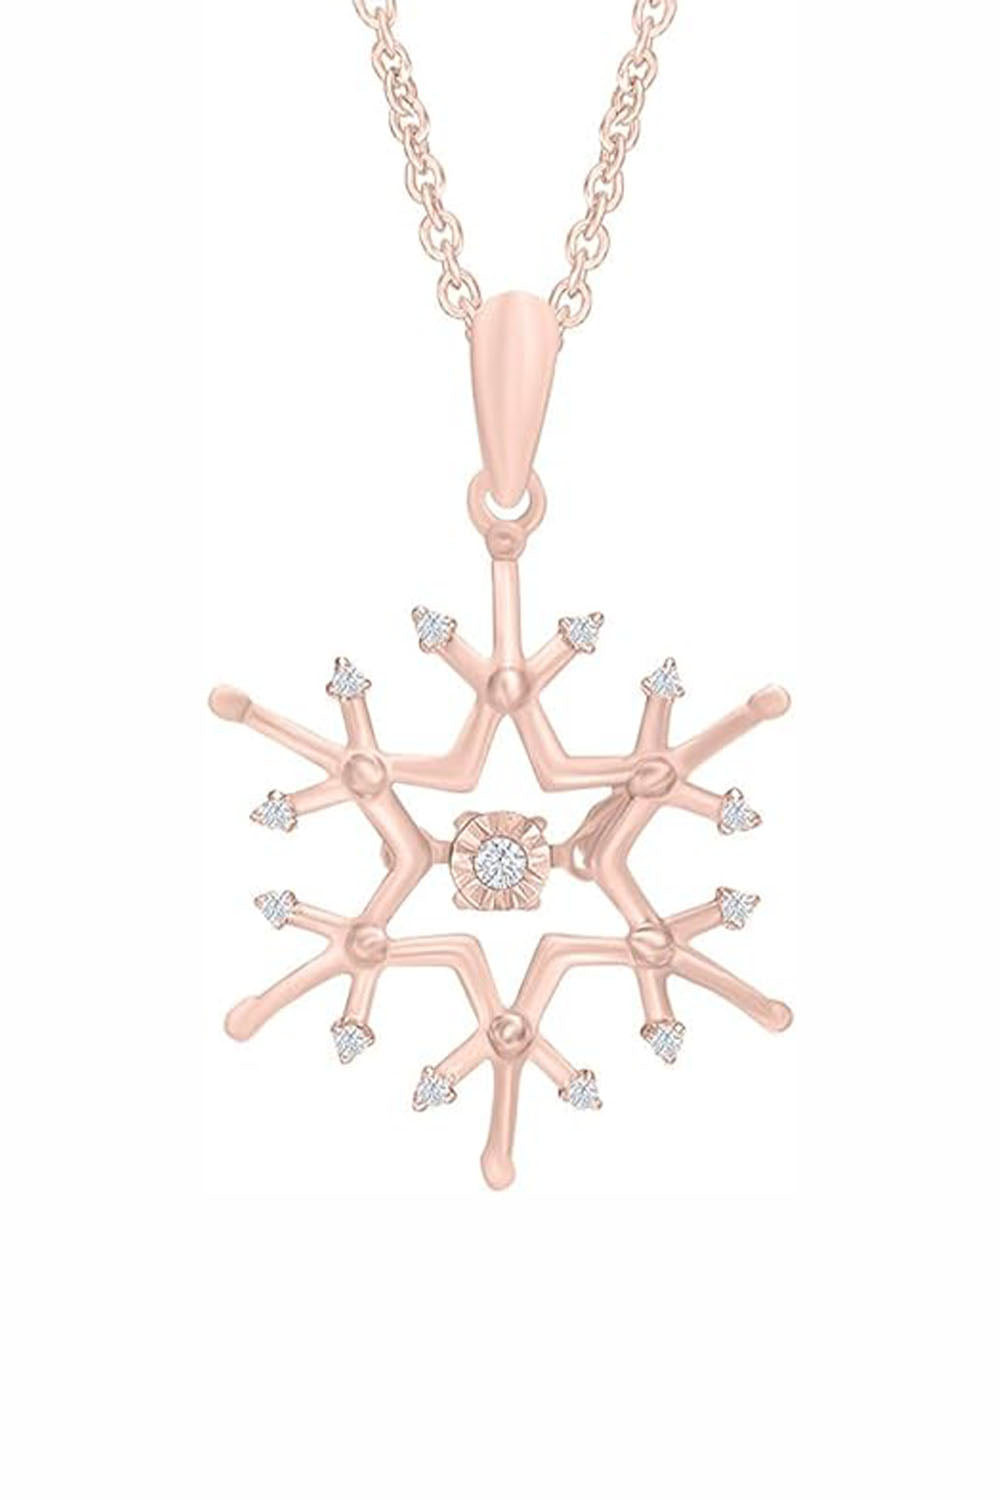 Moissanite Snowflake Pendant Necklace in 18K Gold Plated Sterling Silver Anniversary Christmas.